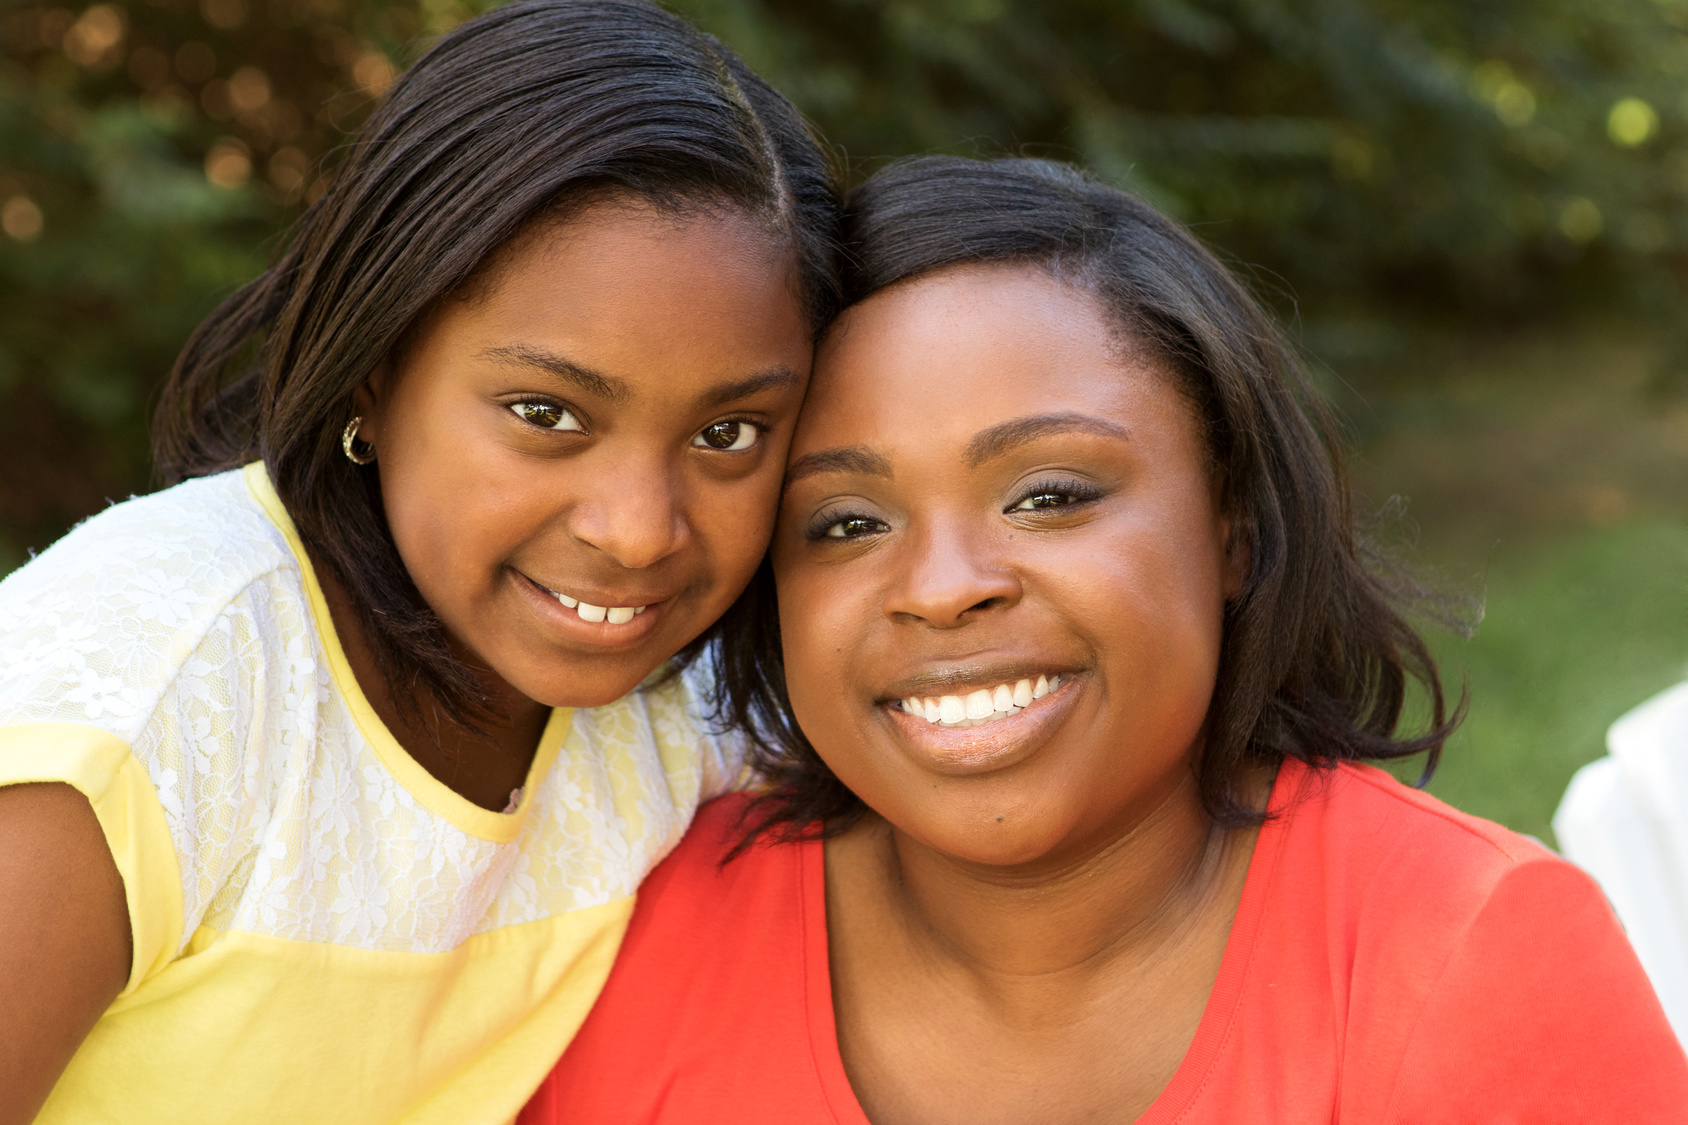 Portrait of an African American mother and her daughter.